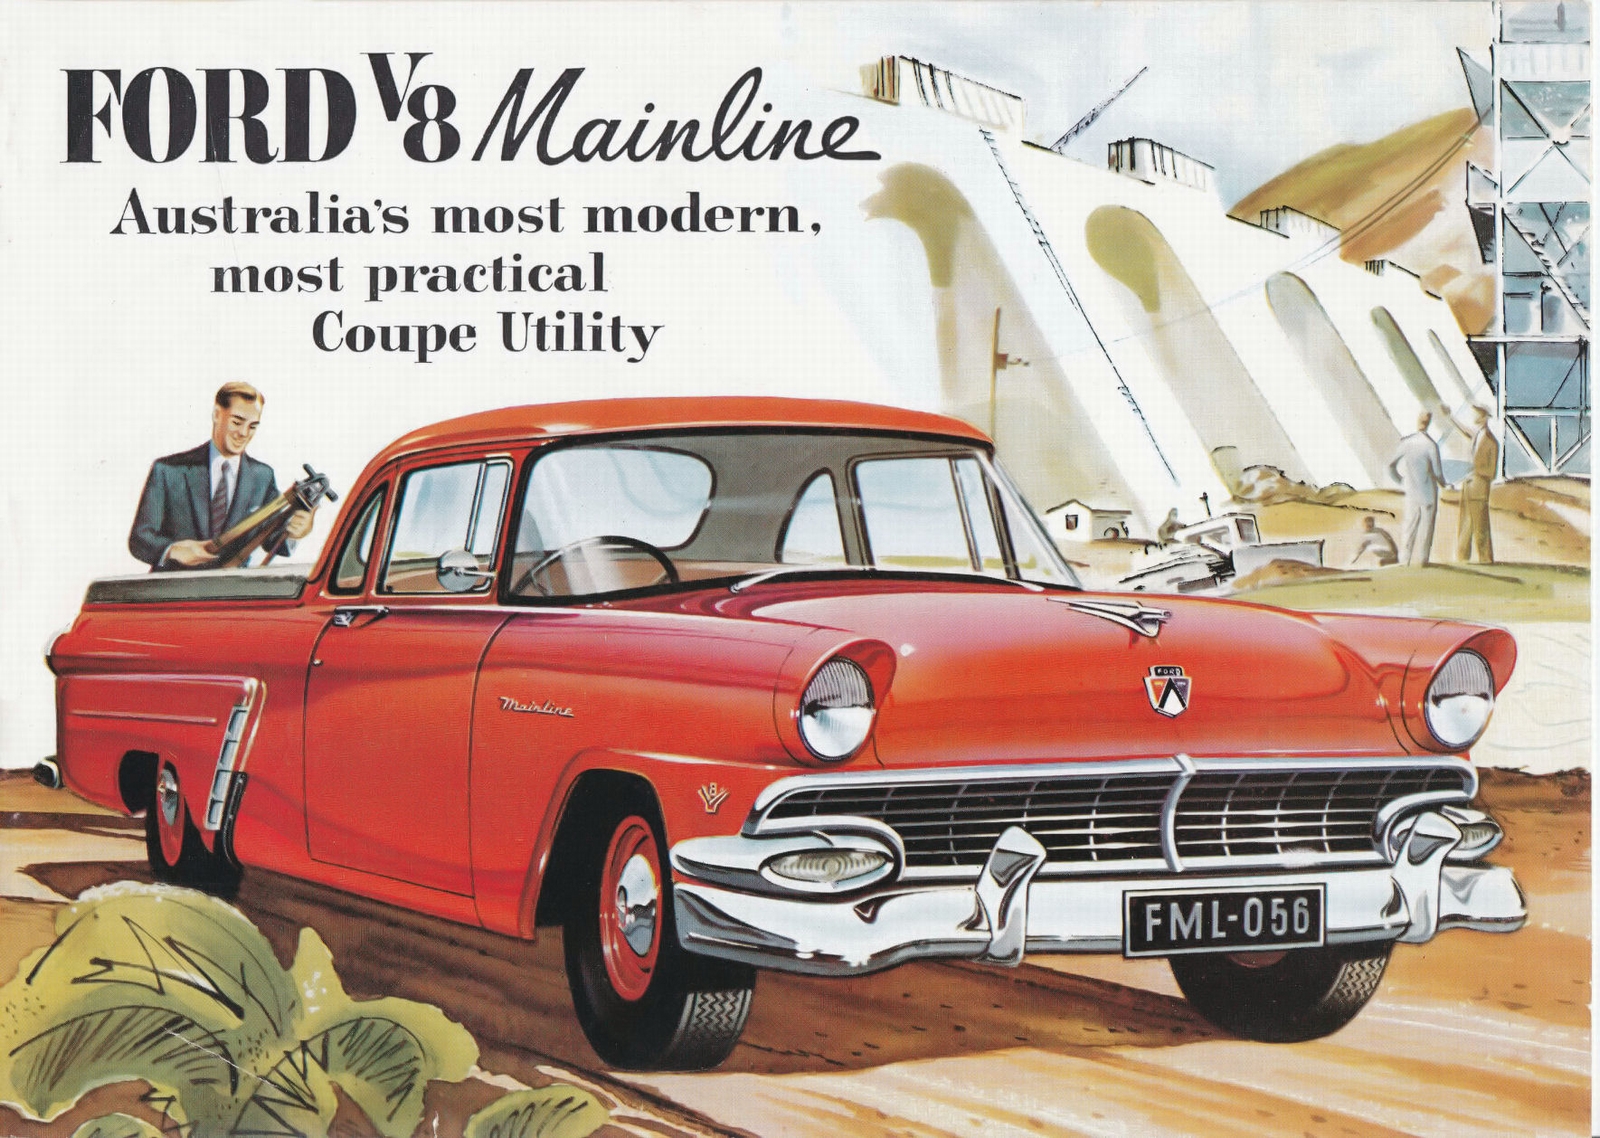 n_1956 Ford Malnline Coupe Utility (Aus)-01.jpg